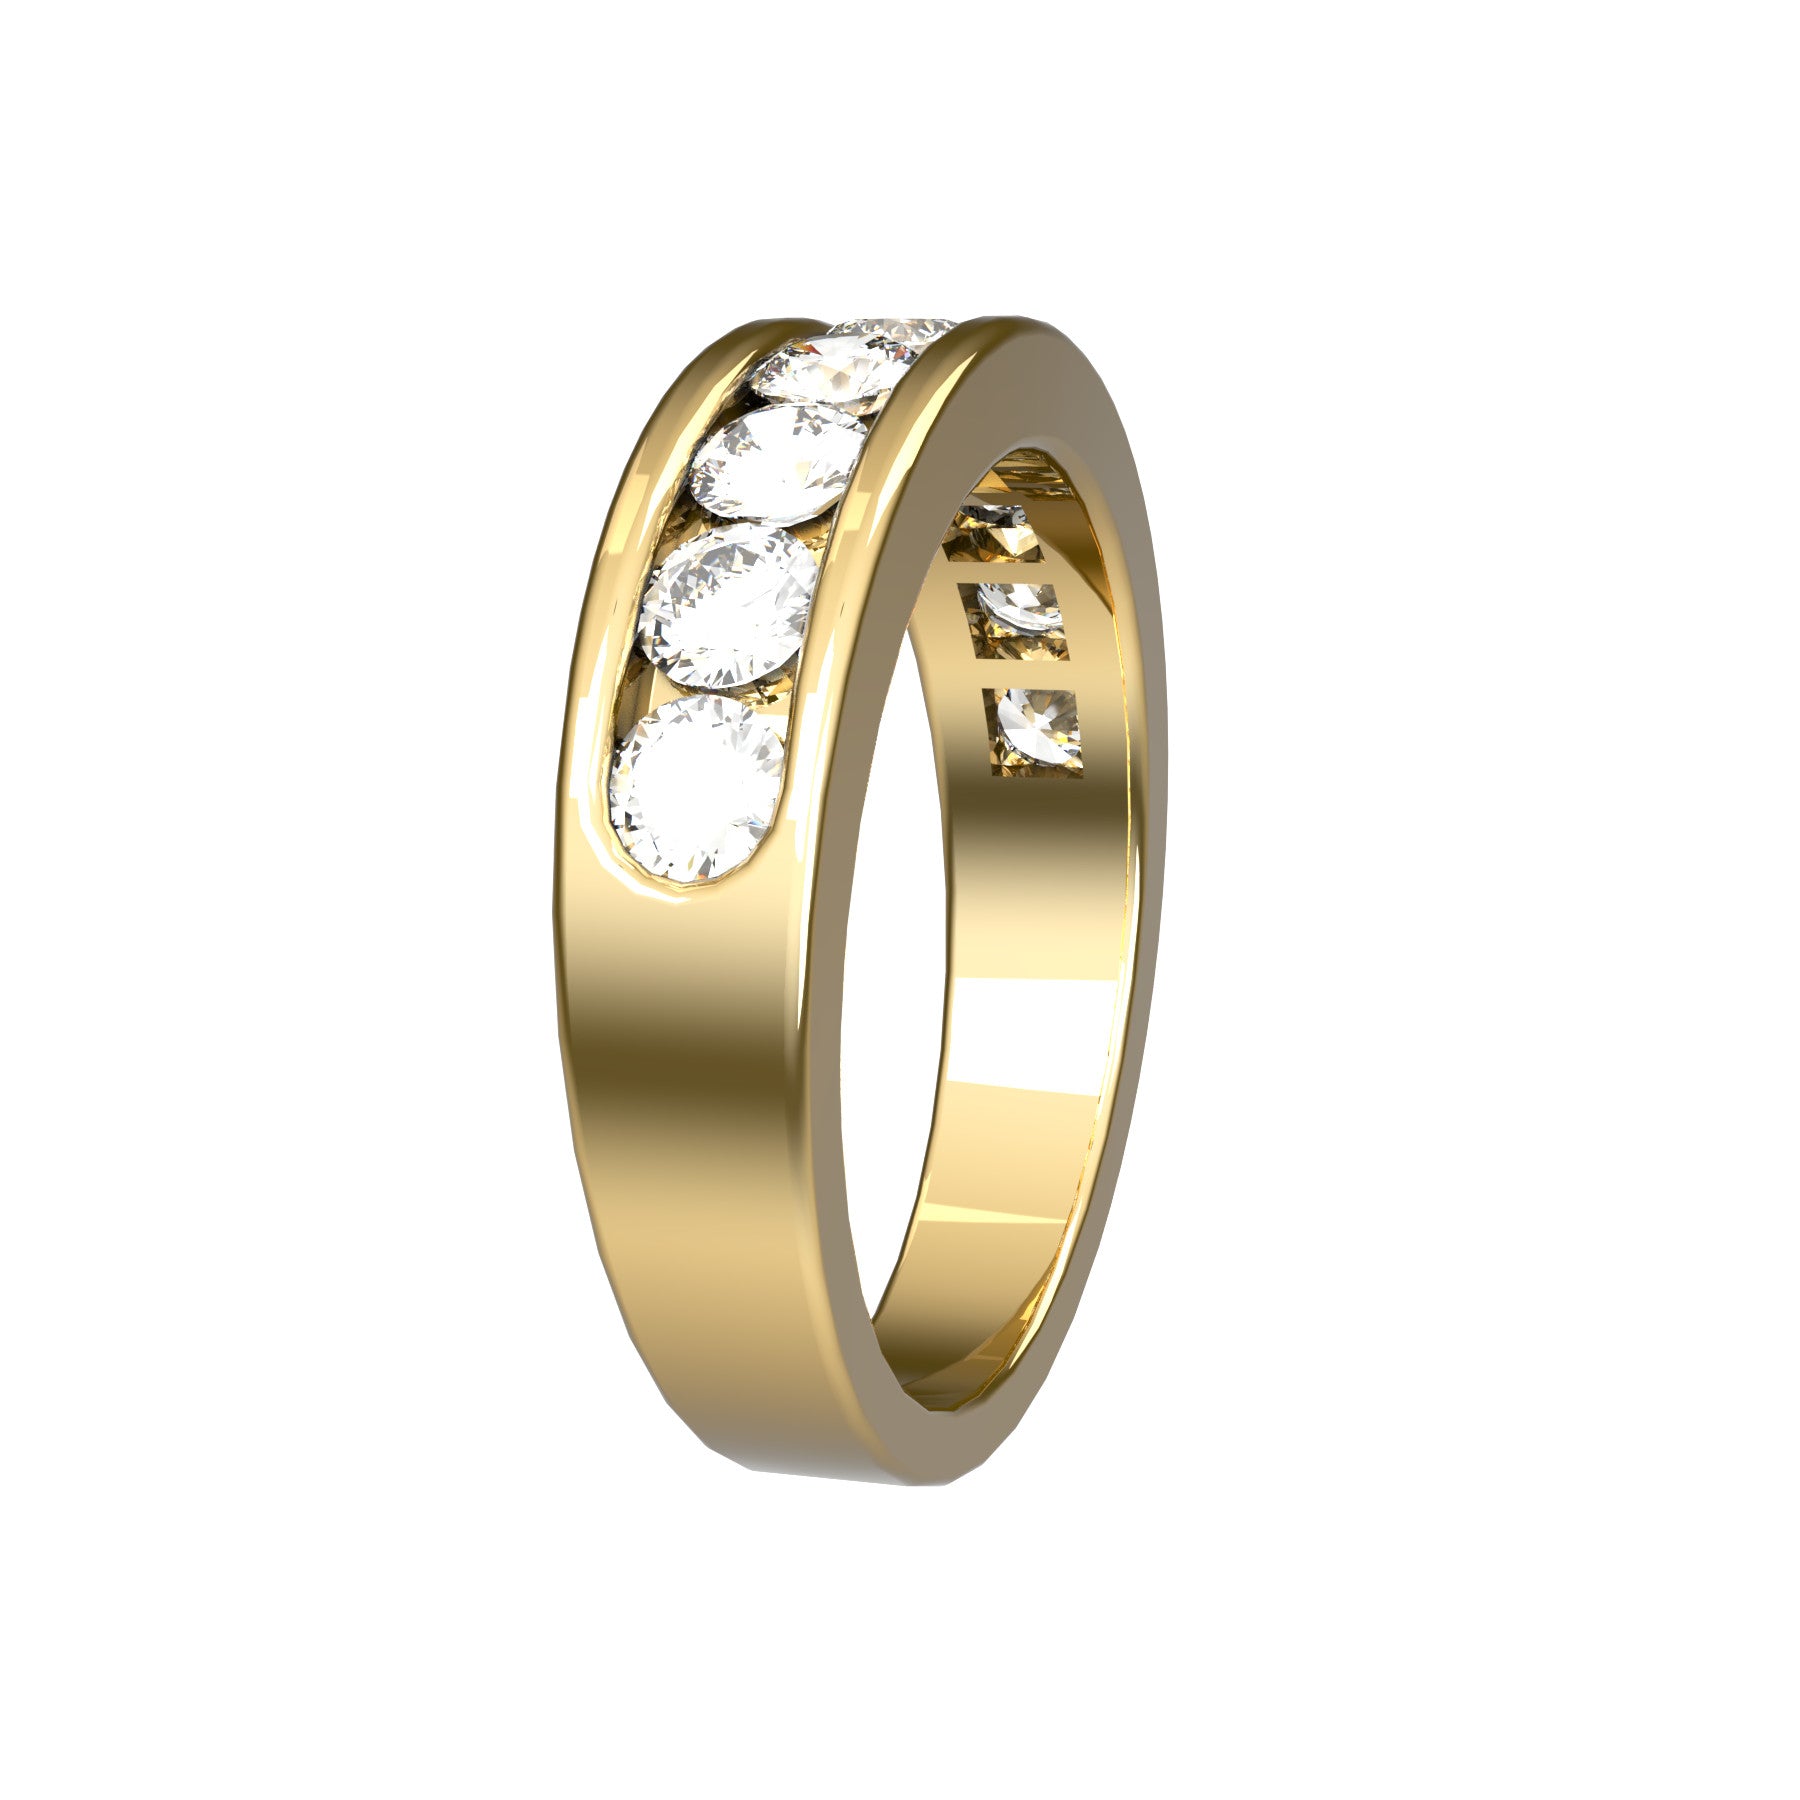 perpetual half wedding ring , 18 K yellow gold, 0,10 ct round natural diamond, weight about 5,3 g. (0.18 oz), width 5,20 mm